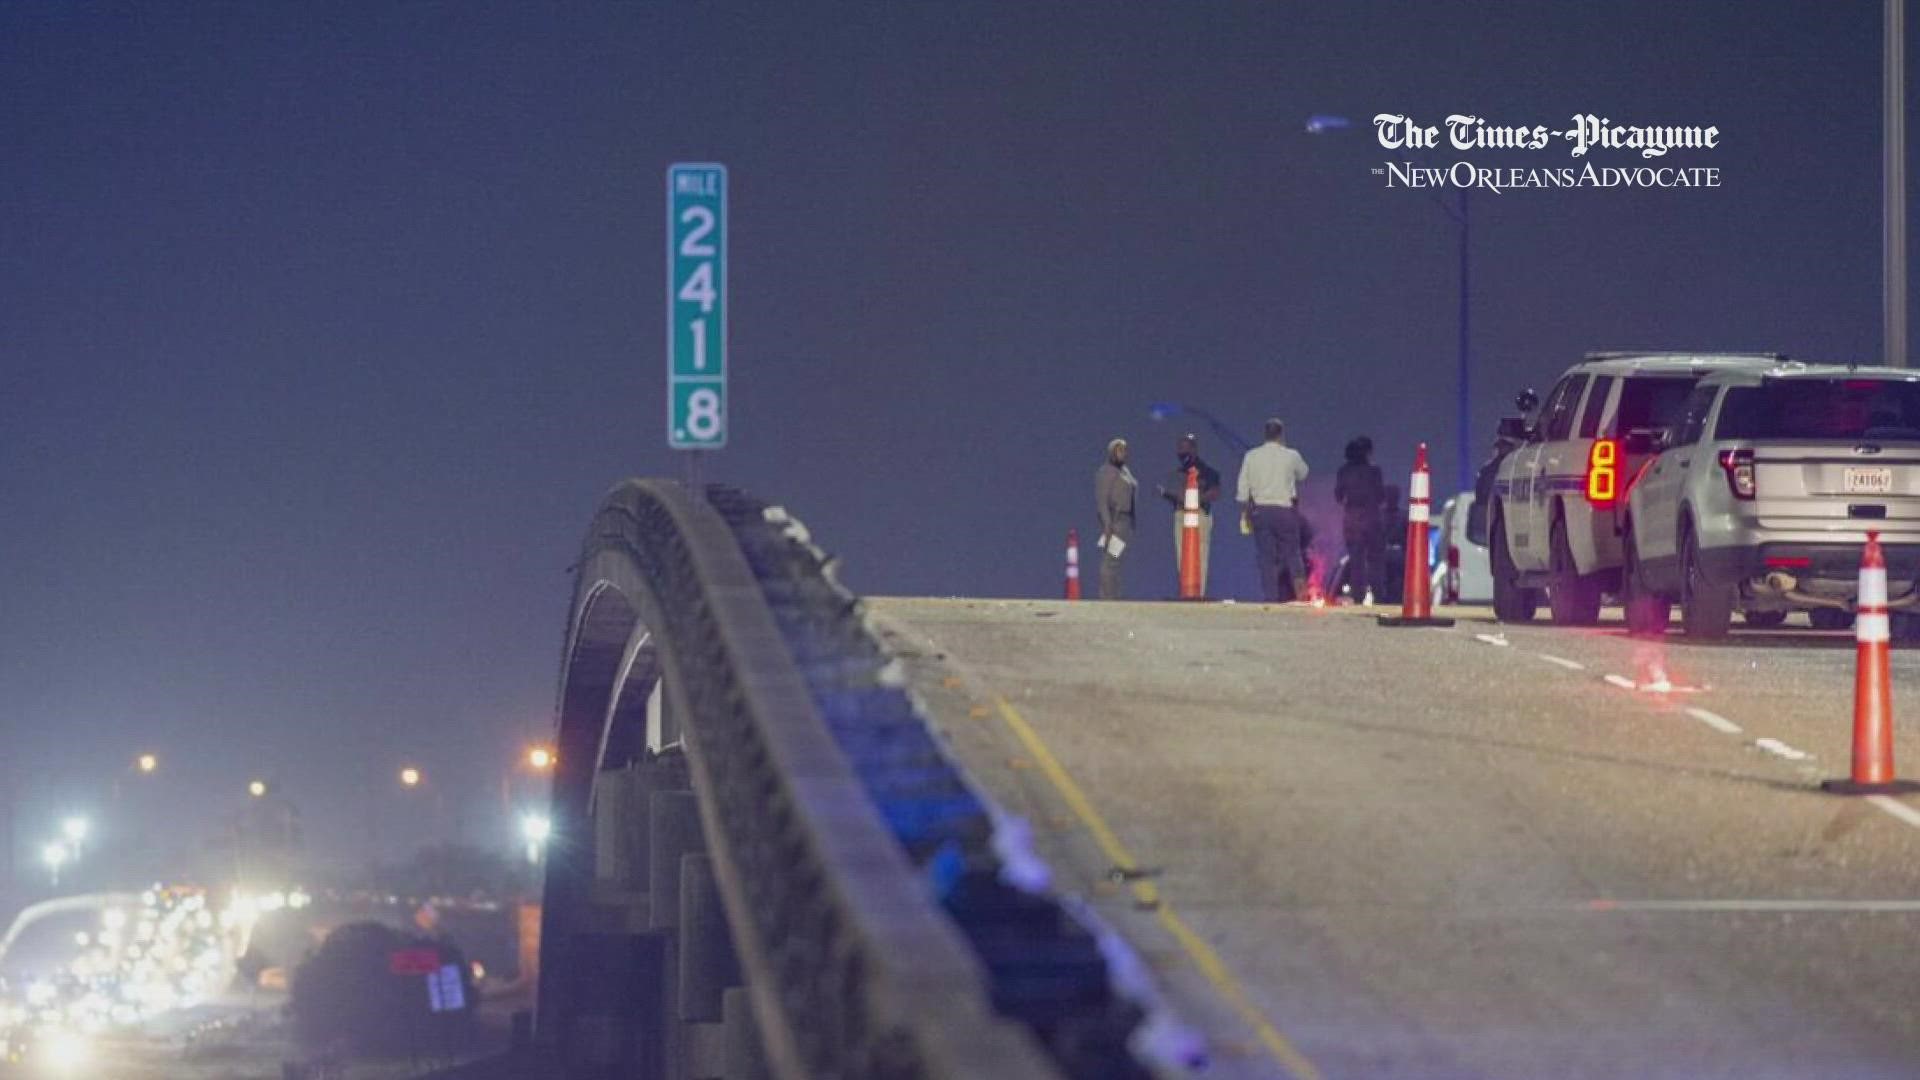 Wednesday night was the most recent interstate shooting. Police report that a 28-year-old man was shot and killed in his car on I-10 East near Crowder Boulevard.